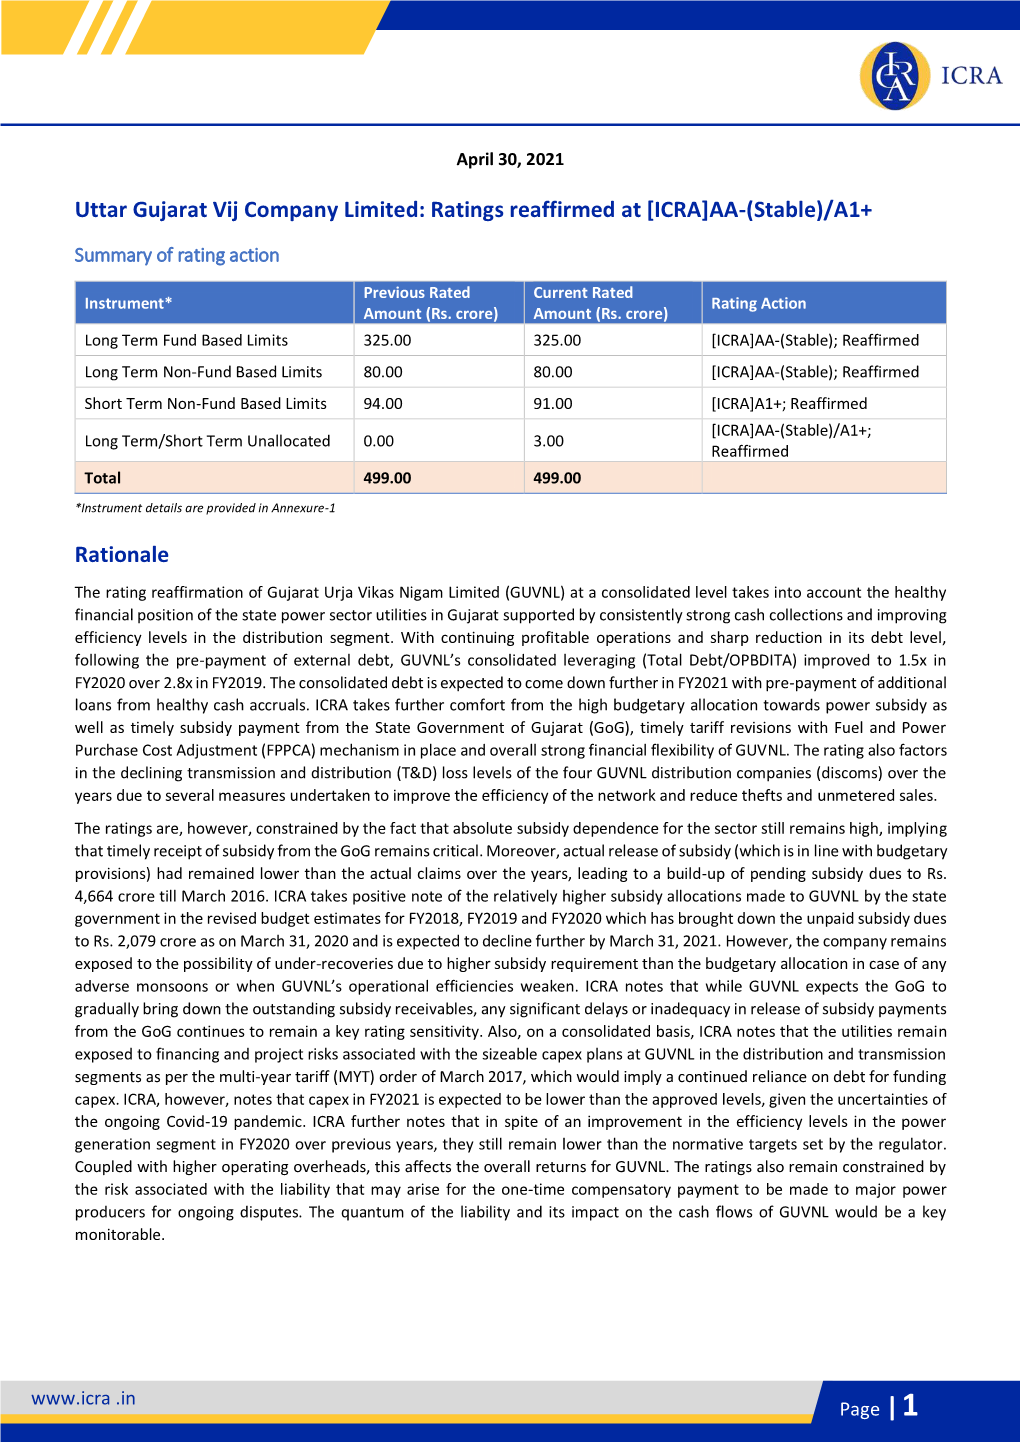 Uttar Gujarat Vij Company Limited: Ratings Reaffirmed at [ICRA]AA-(Stable)/A1+ Rationale